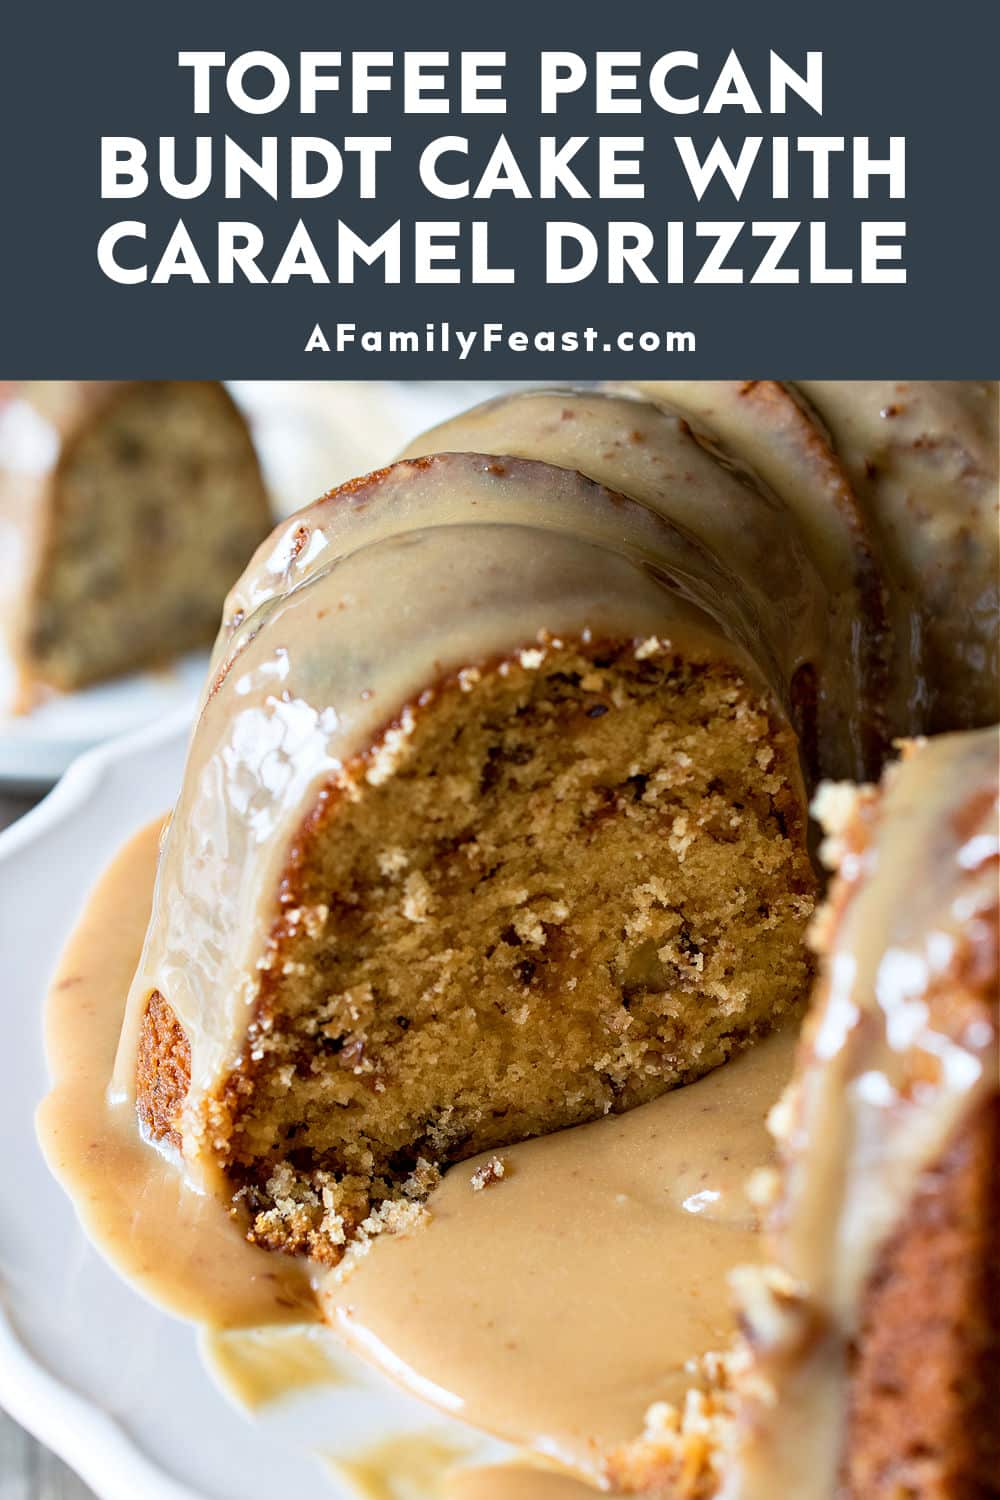 Toffee Pecan Bundt Cake with Caramel Drizzle - A Family Feast